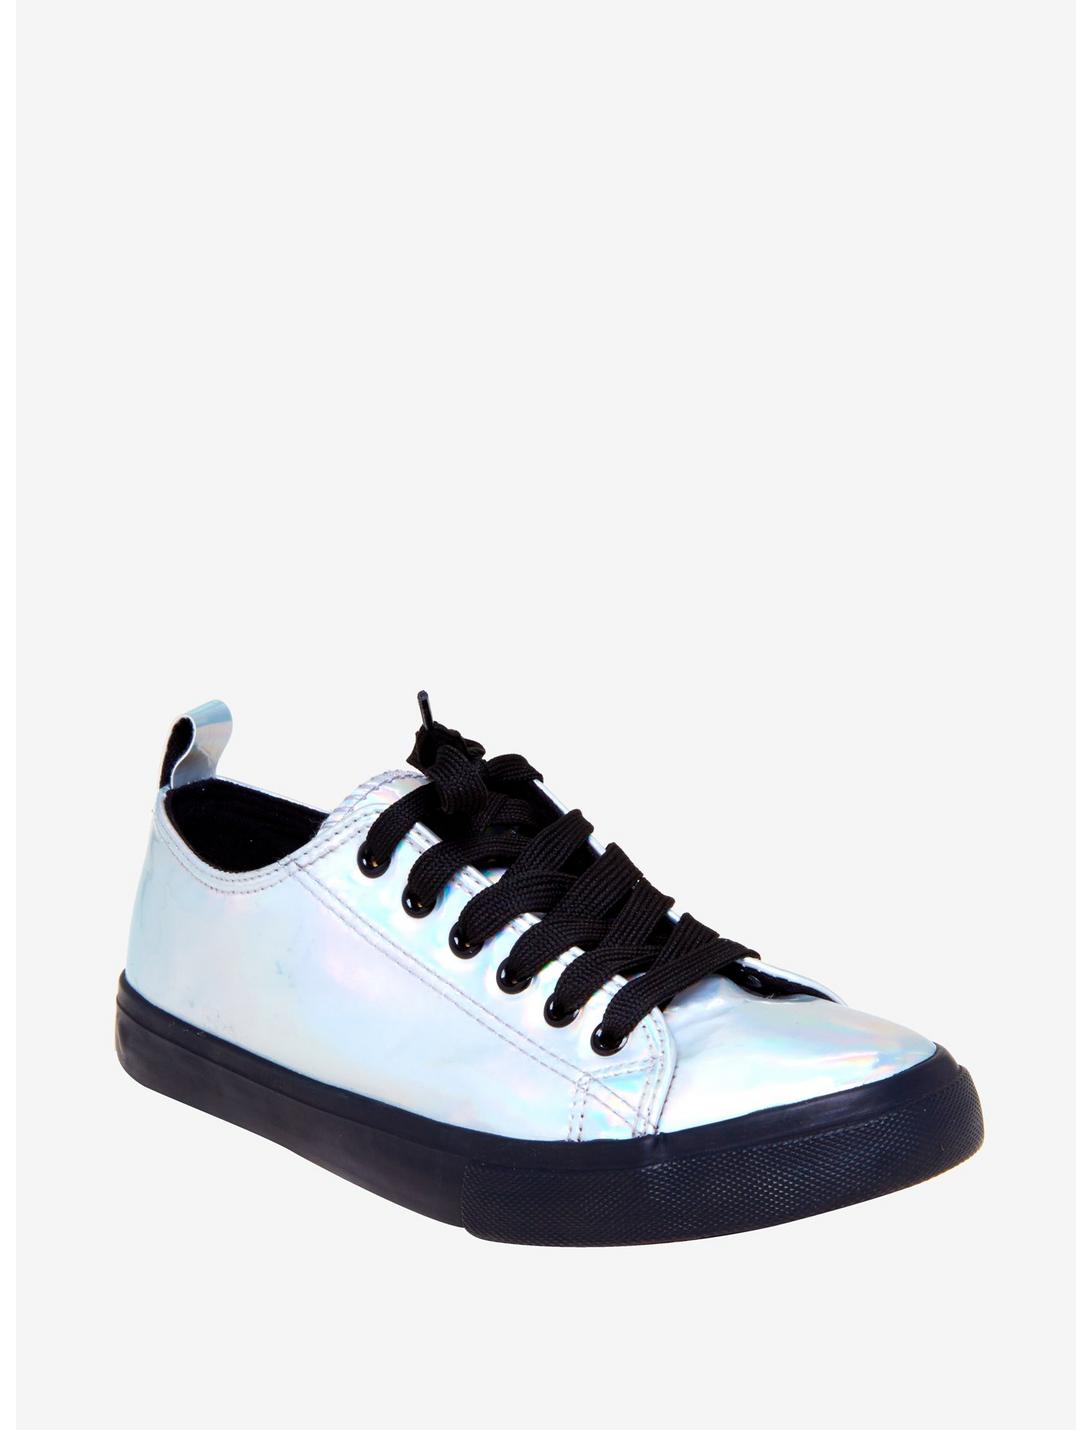 Light Hologram Lace-Up Sneakers, MULTI, hi-res